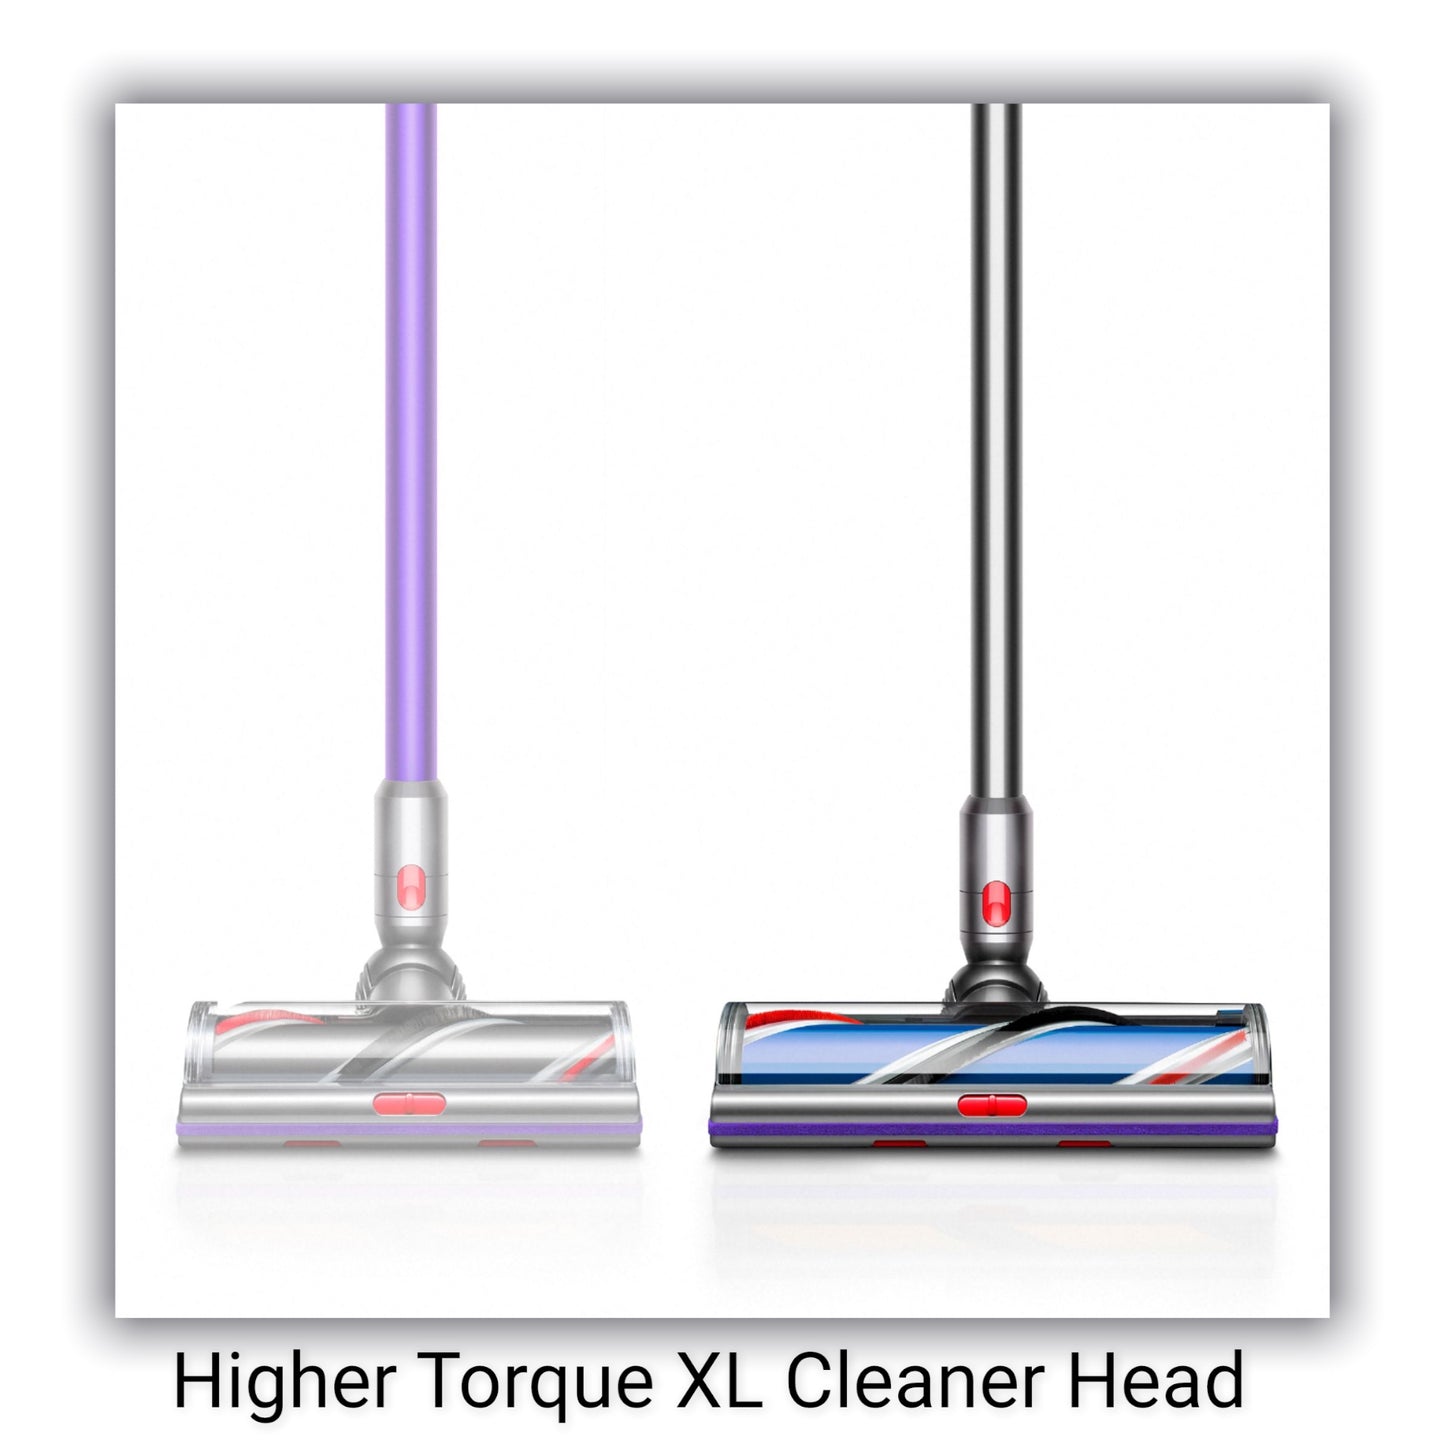 NEW GENUINE Dyson SV16 OUTSIZE X-Large 12" HIGH TORQUE XL Cleaner Head Brush